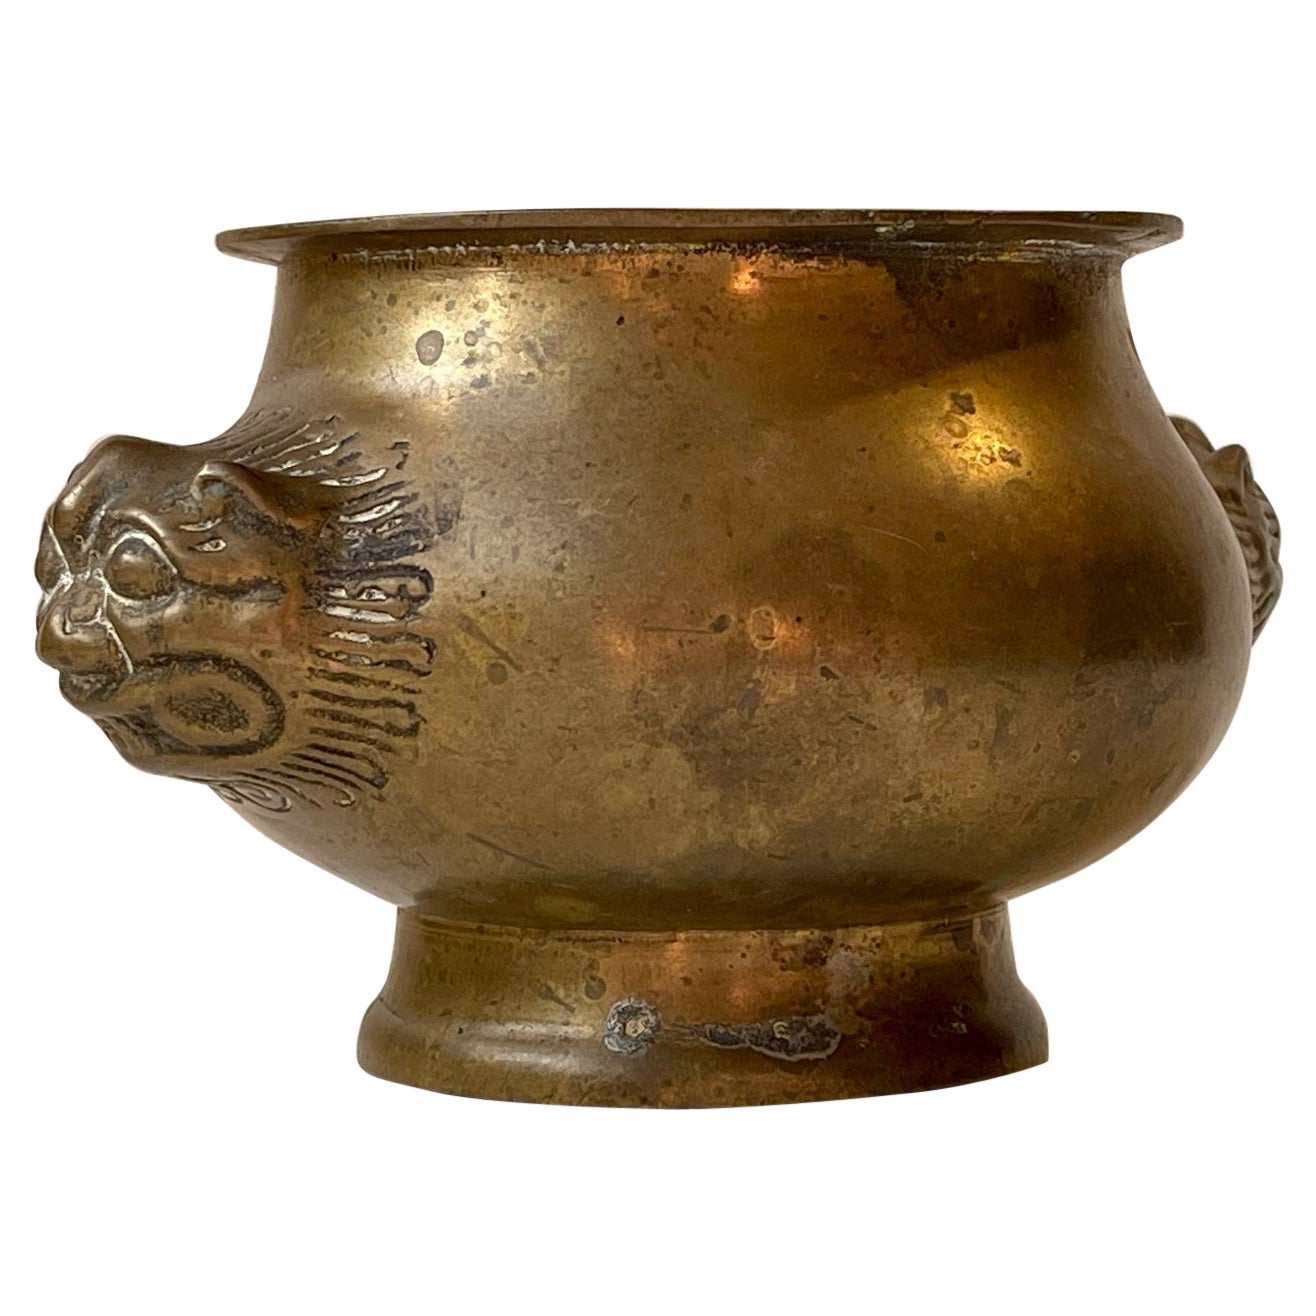 Antique Indian Brass Lota or Jardiniere with Lion Heads